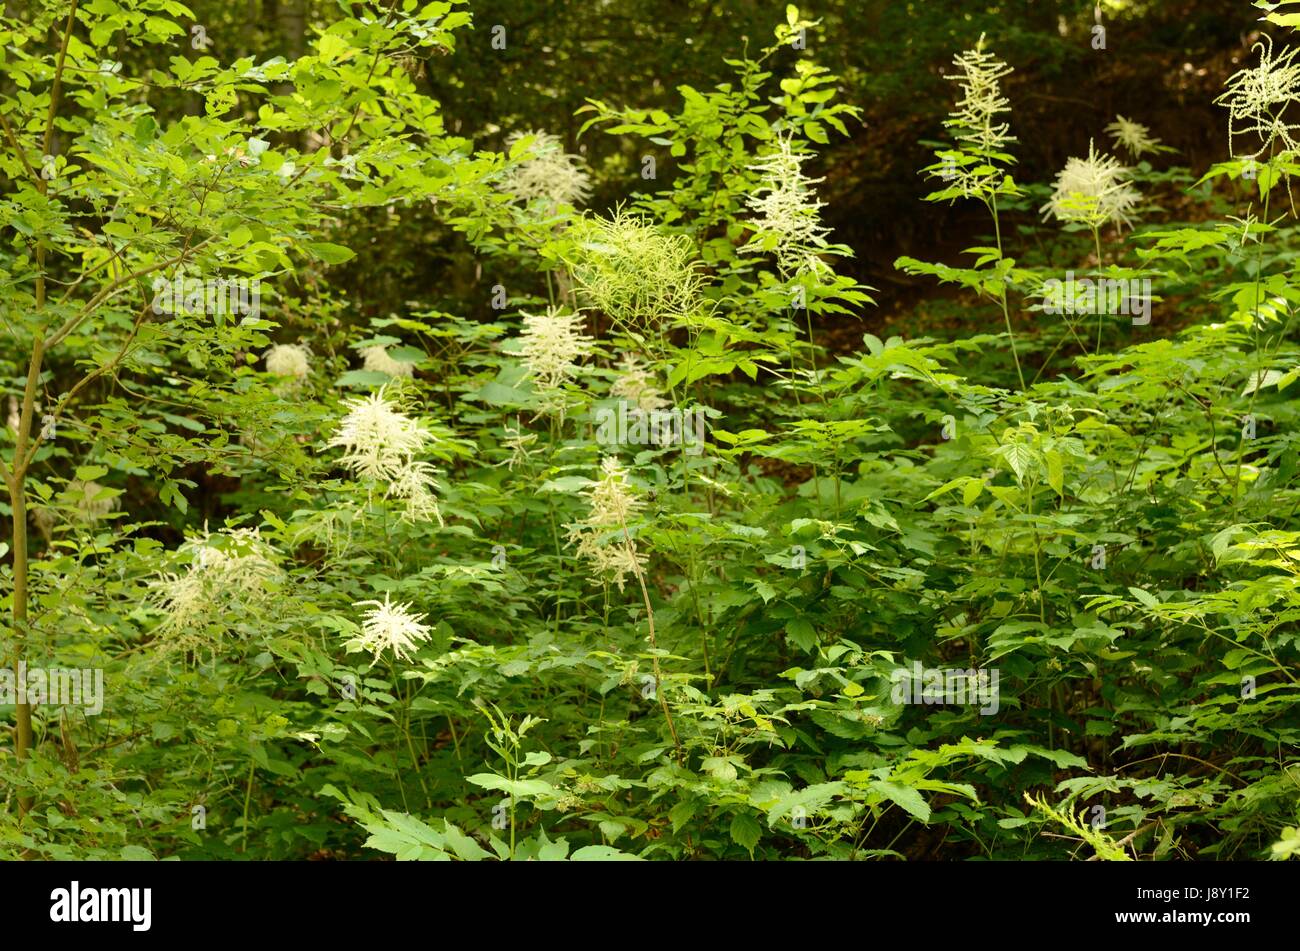 Aruncus dioicus, or Bride's Feathers, flowering in a European montane forest. The plant is also called Goat's Beard. Stock Photo